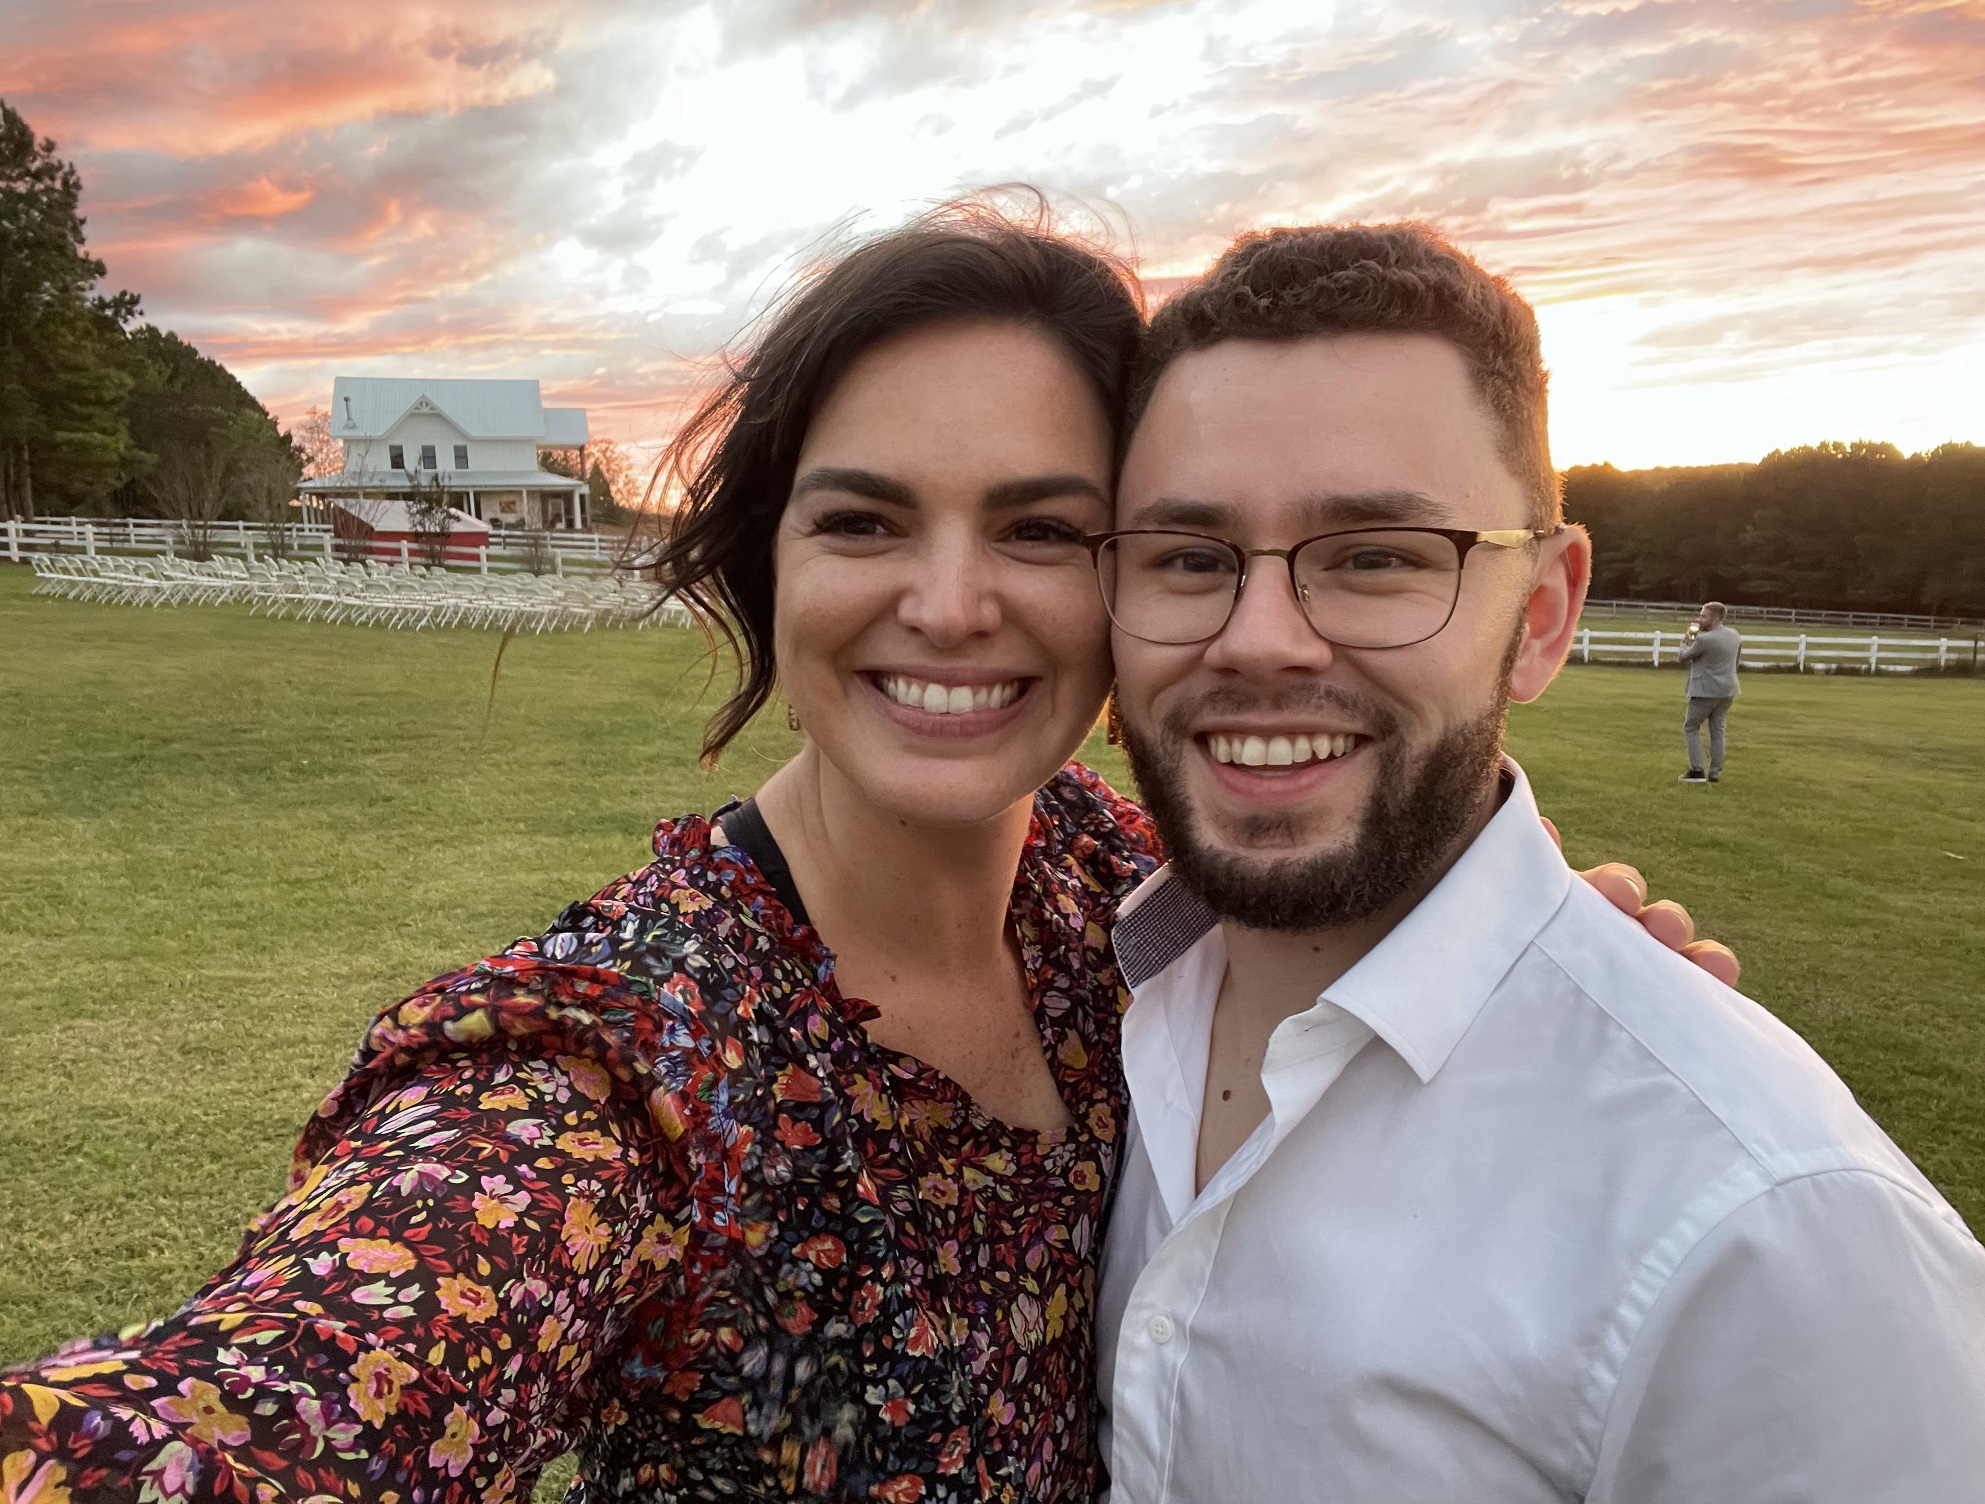 Chelsea and Chris take a selfie with a sunset behind them.